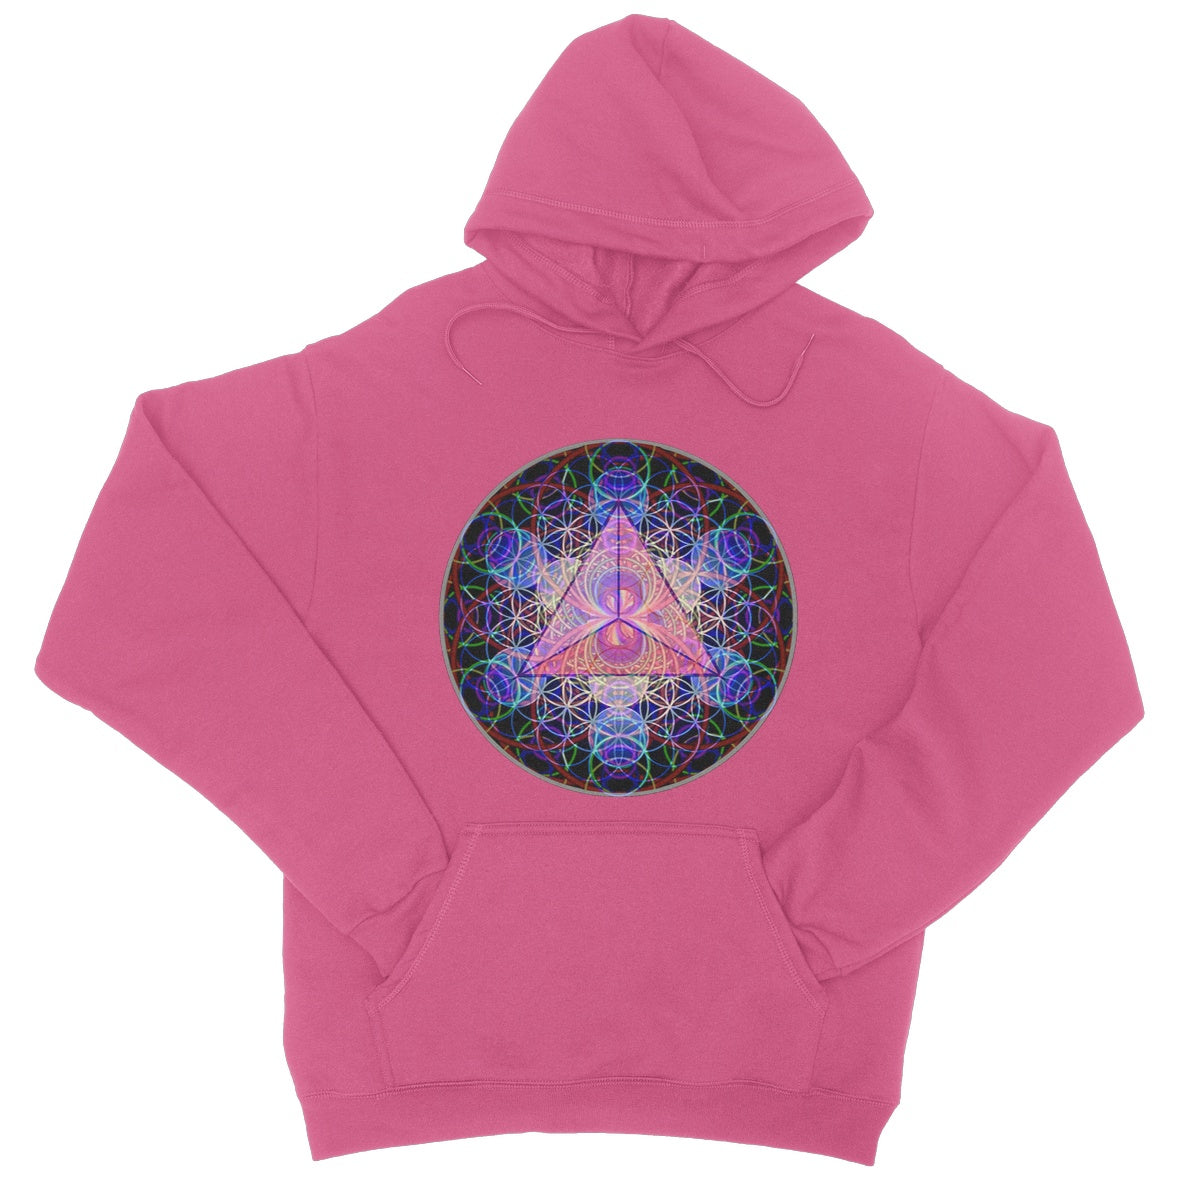 The Platonic Solid Tetrahedron College Hoodie